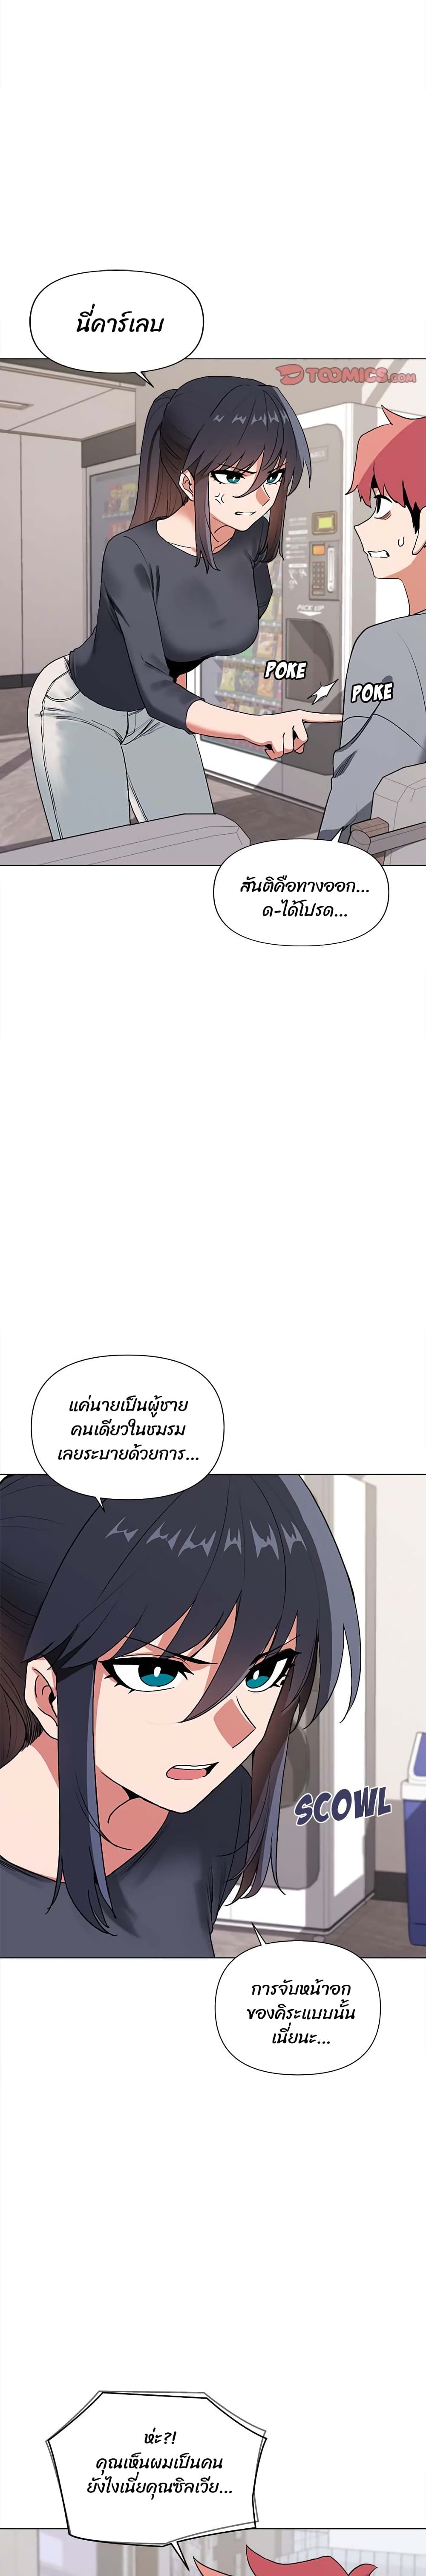 College Life Starts With Clubs 8 ภาพที่ 4